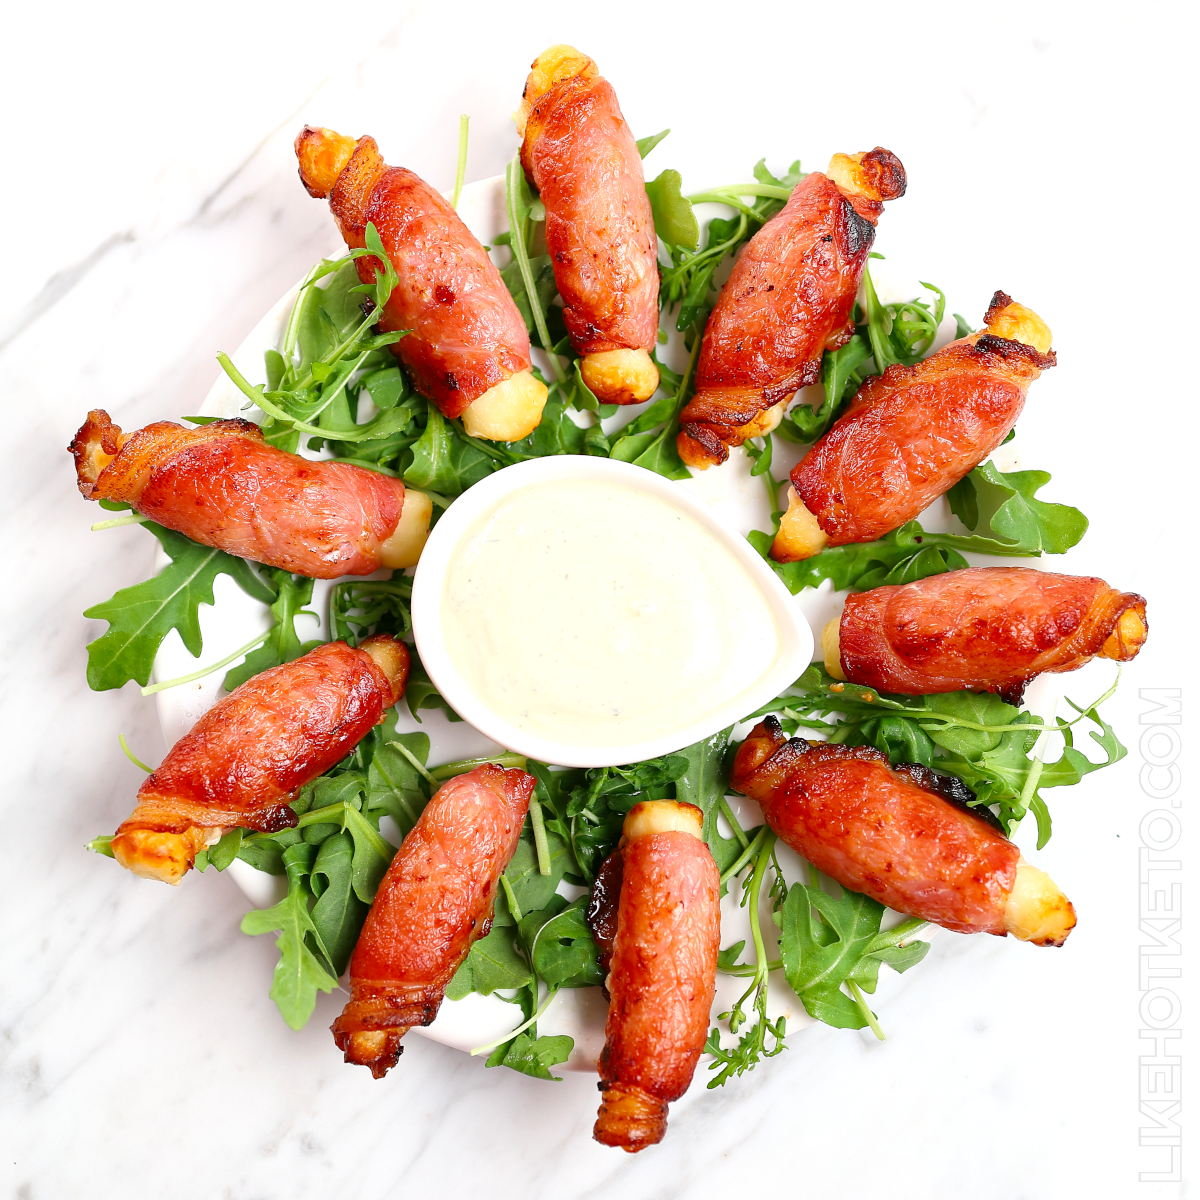 Bacon wrapped halloumi fried snacks on a large plate, surrounding a smalll bowl of ranch dipping sauce.